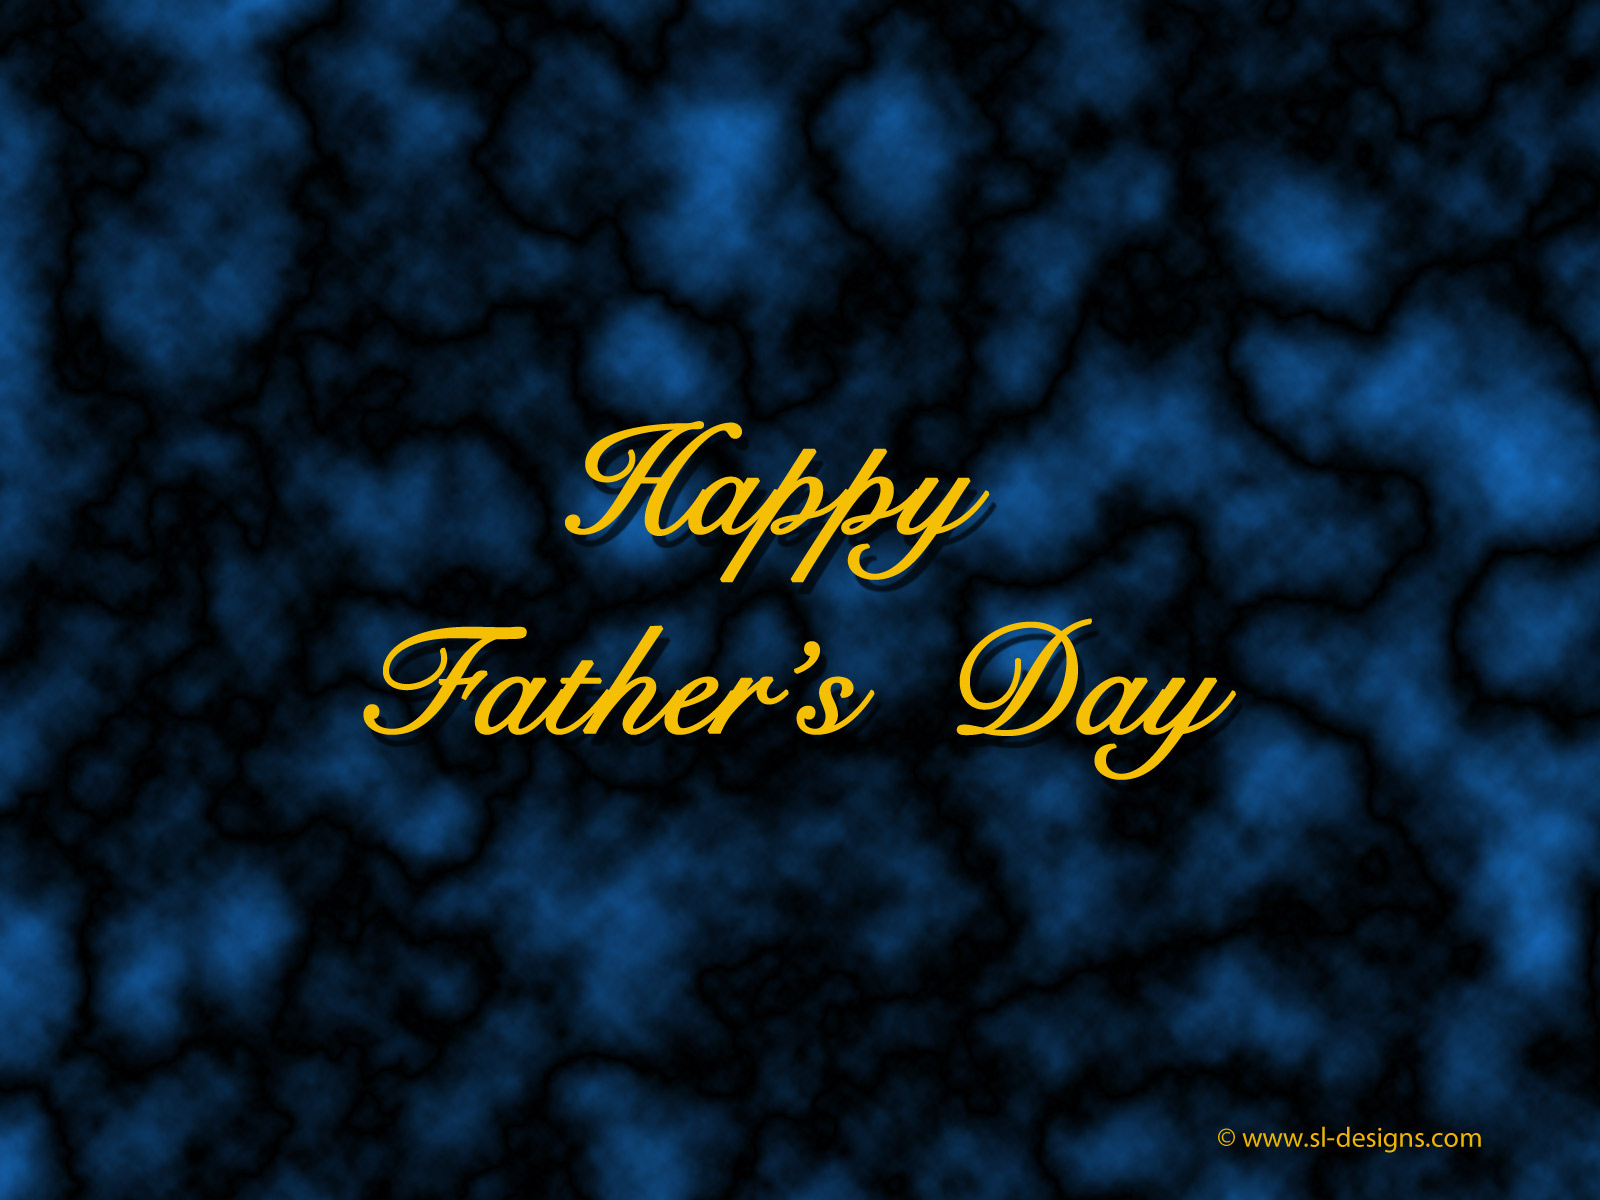 Free Father's day wallpapers for your desktop, web site or blog